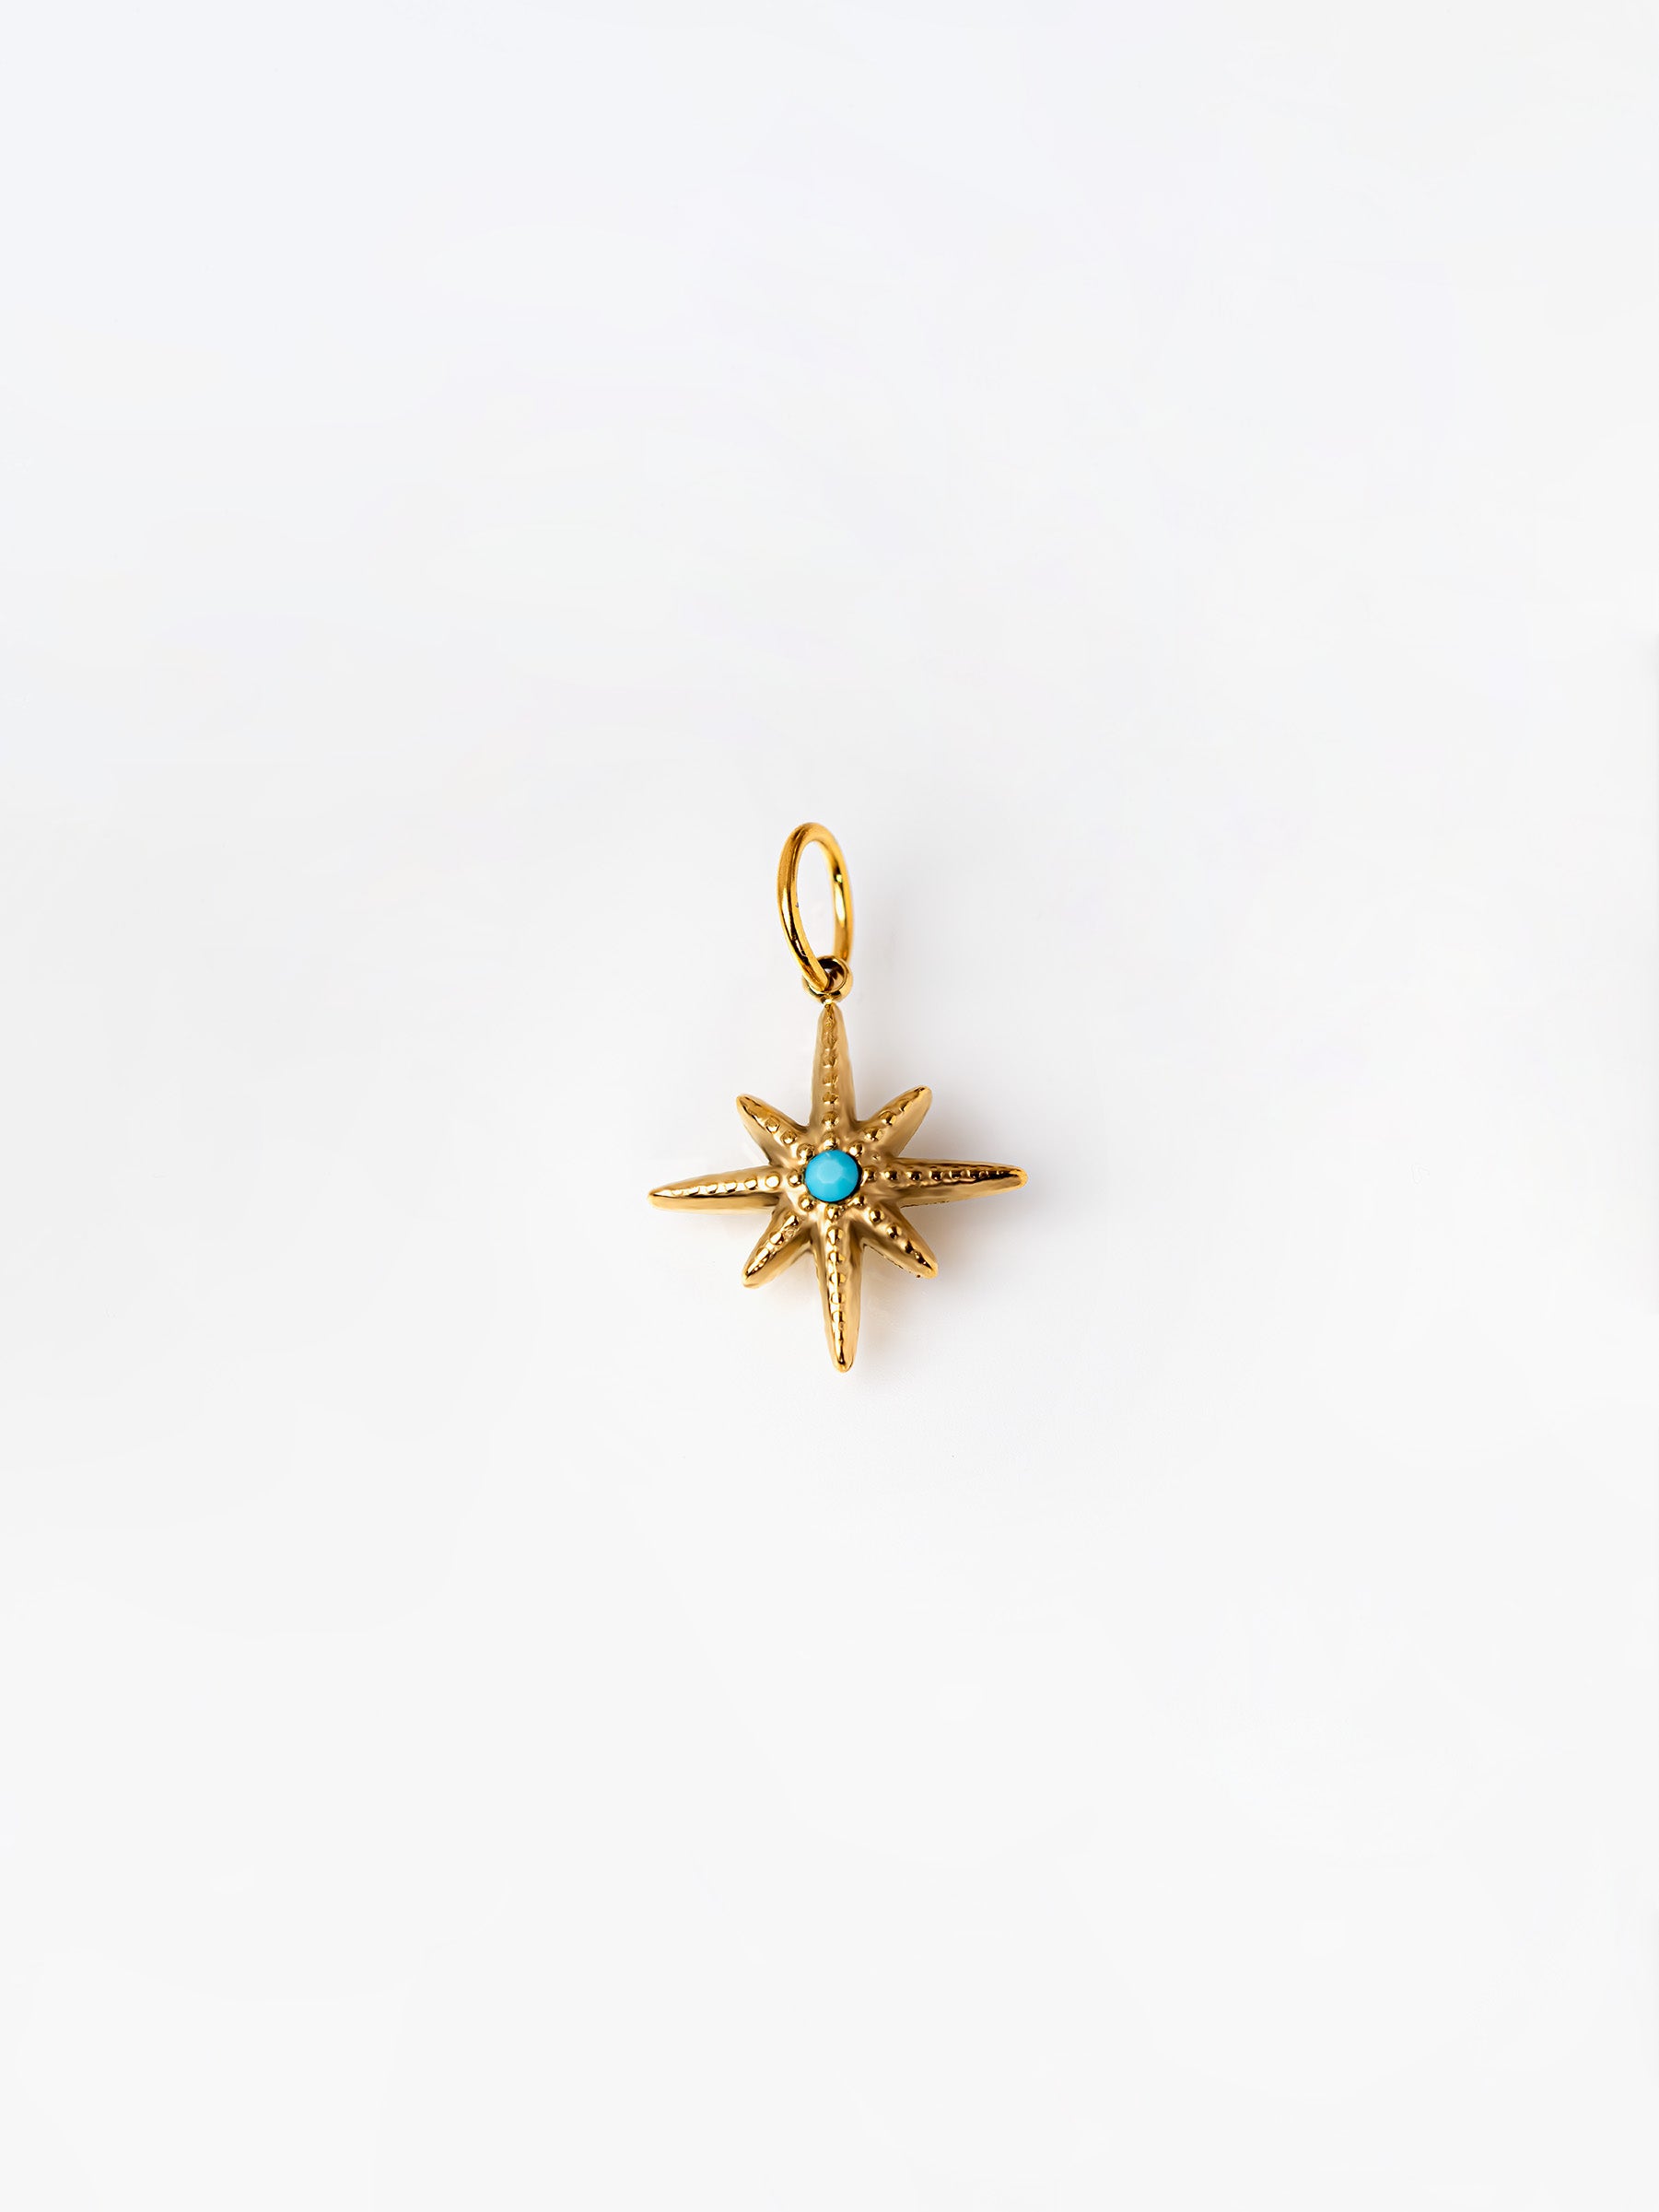 Gold North Star Pendant / Charm With Turquoise Stone